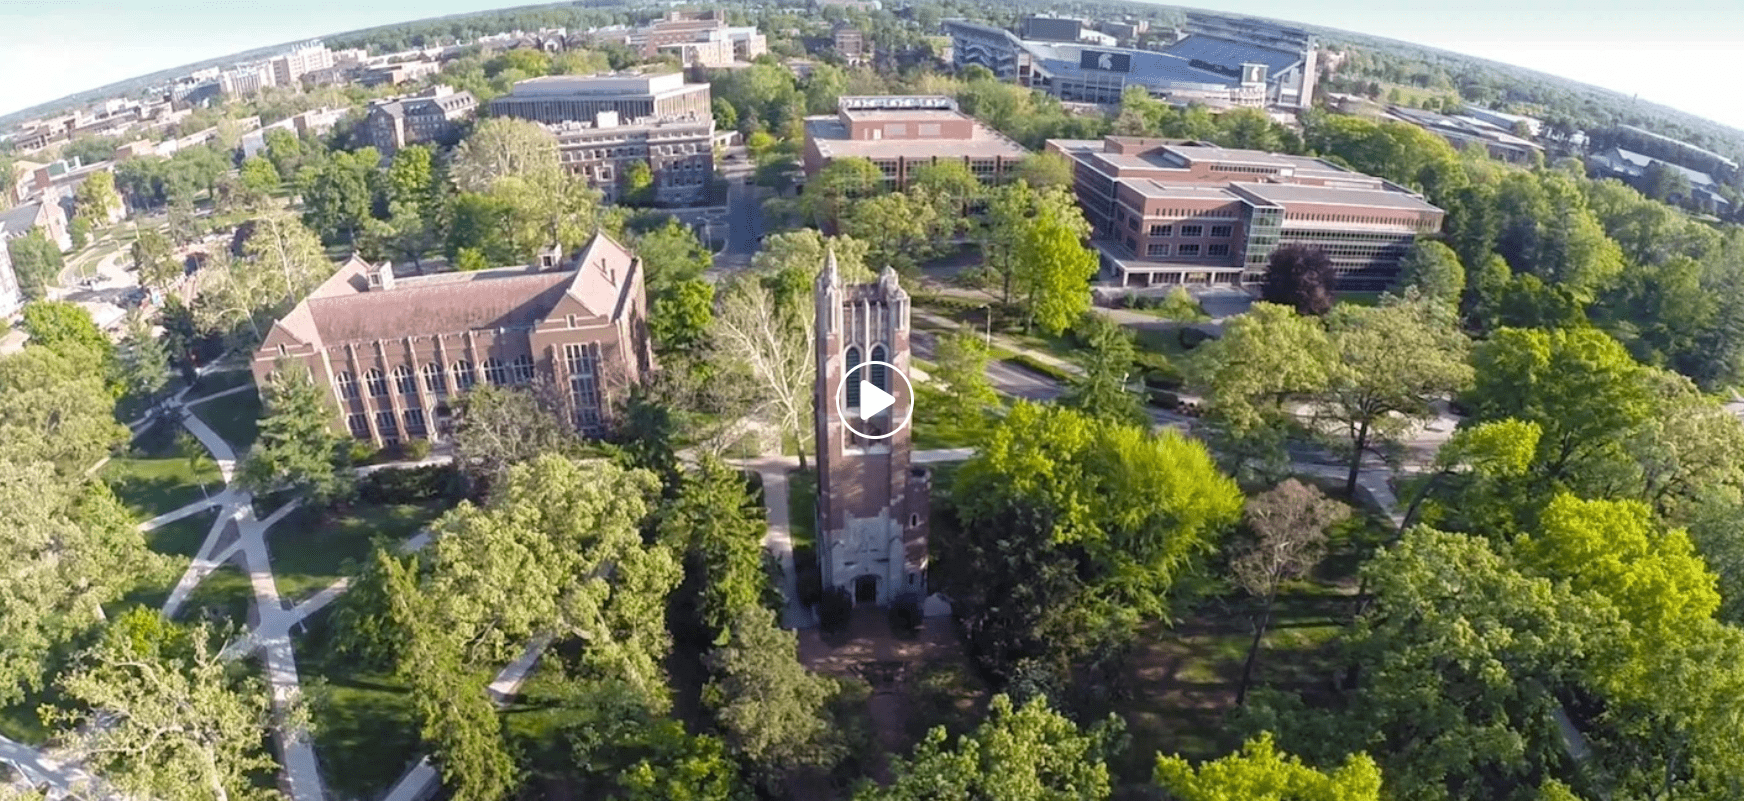 birds-eye view of campus featuring Beaumont Tower